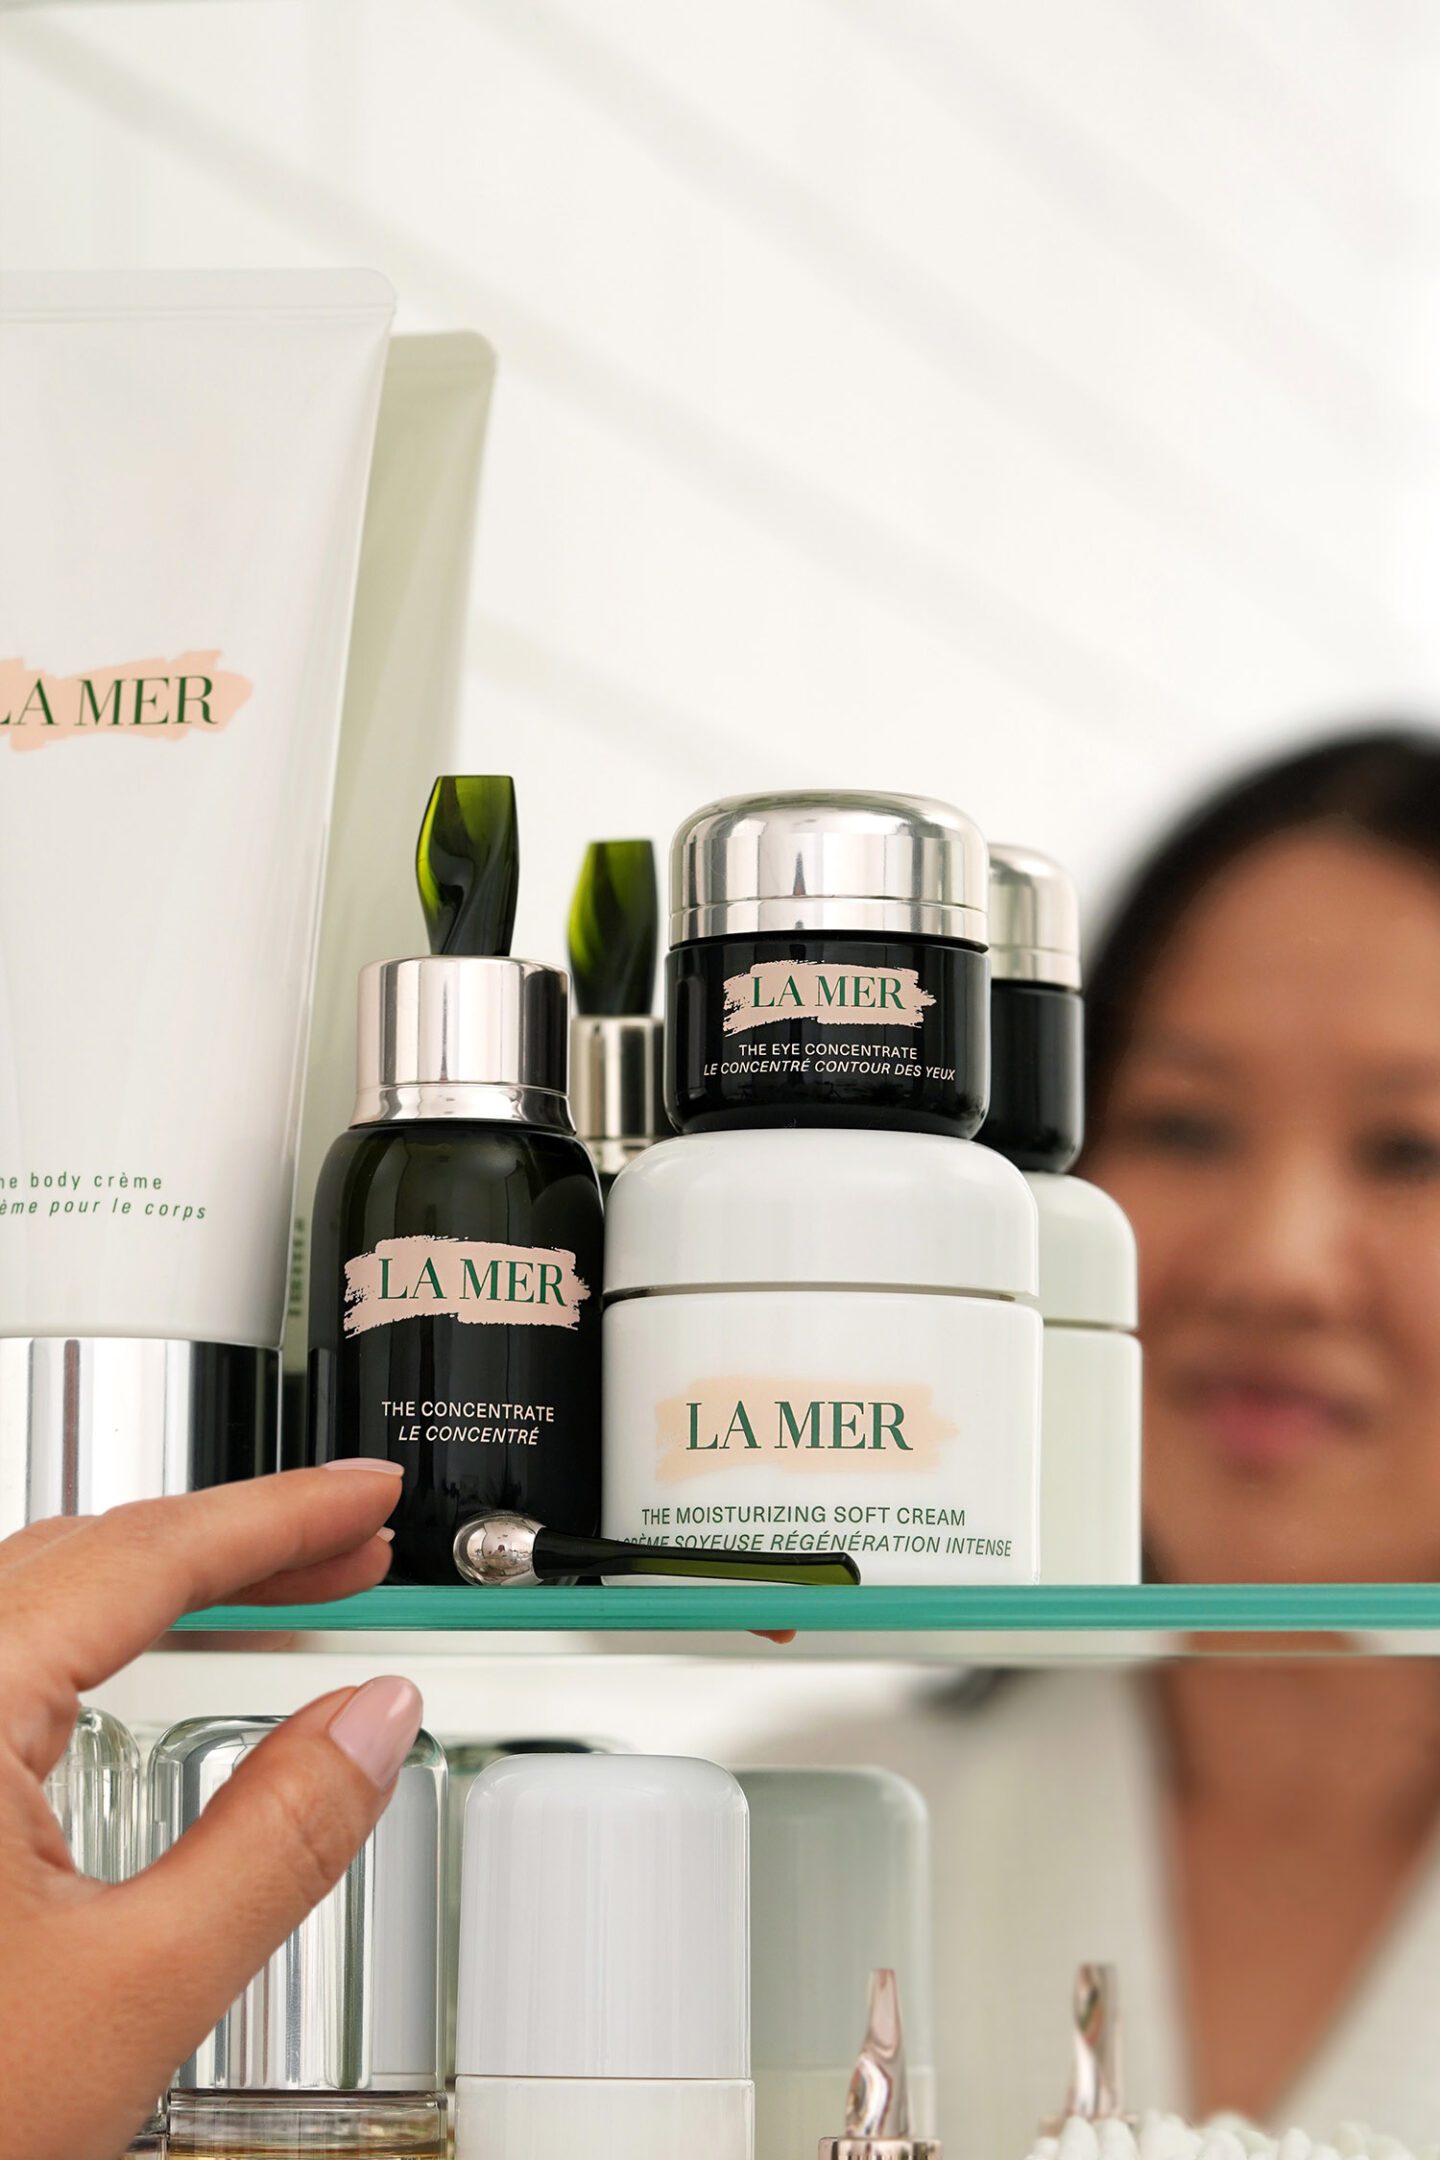 La Mer The Moisturizing Soft Cream, The Concentrate and The Eye Concentrate